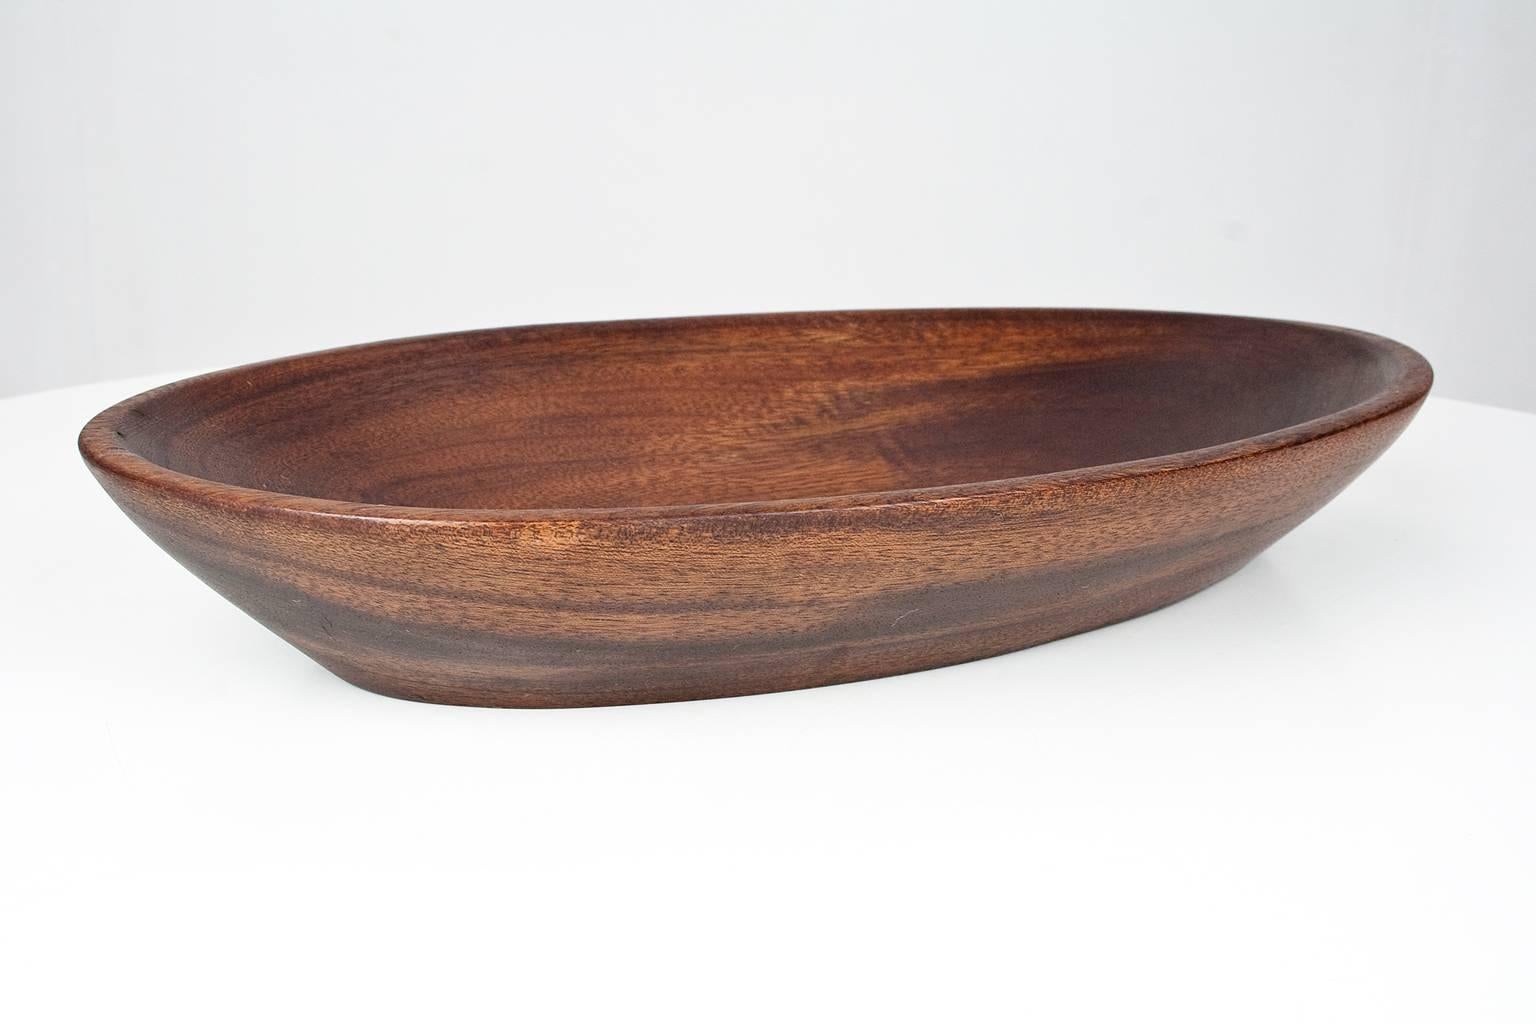 Mid-Century Modern large (41 cm) Danish hand sculptured teak platter or bowl. Beautiful table or desk piece in excellent condition.

Ask us about specific shipping costs to your location.